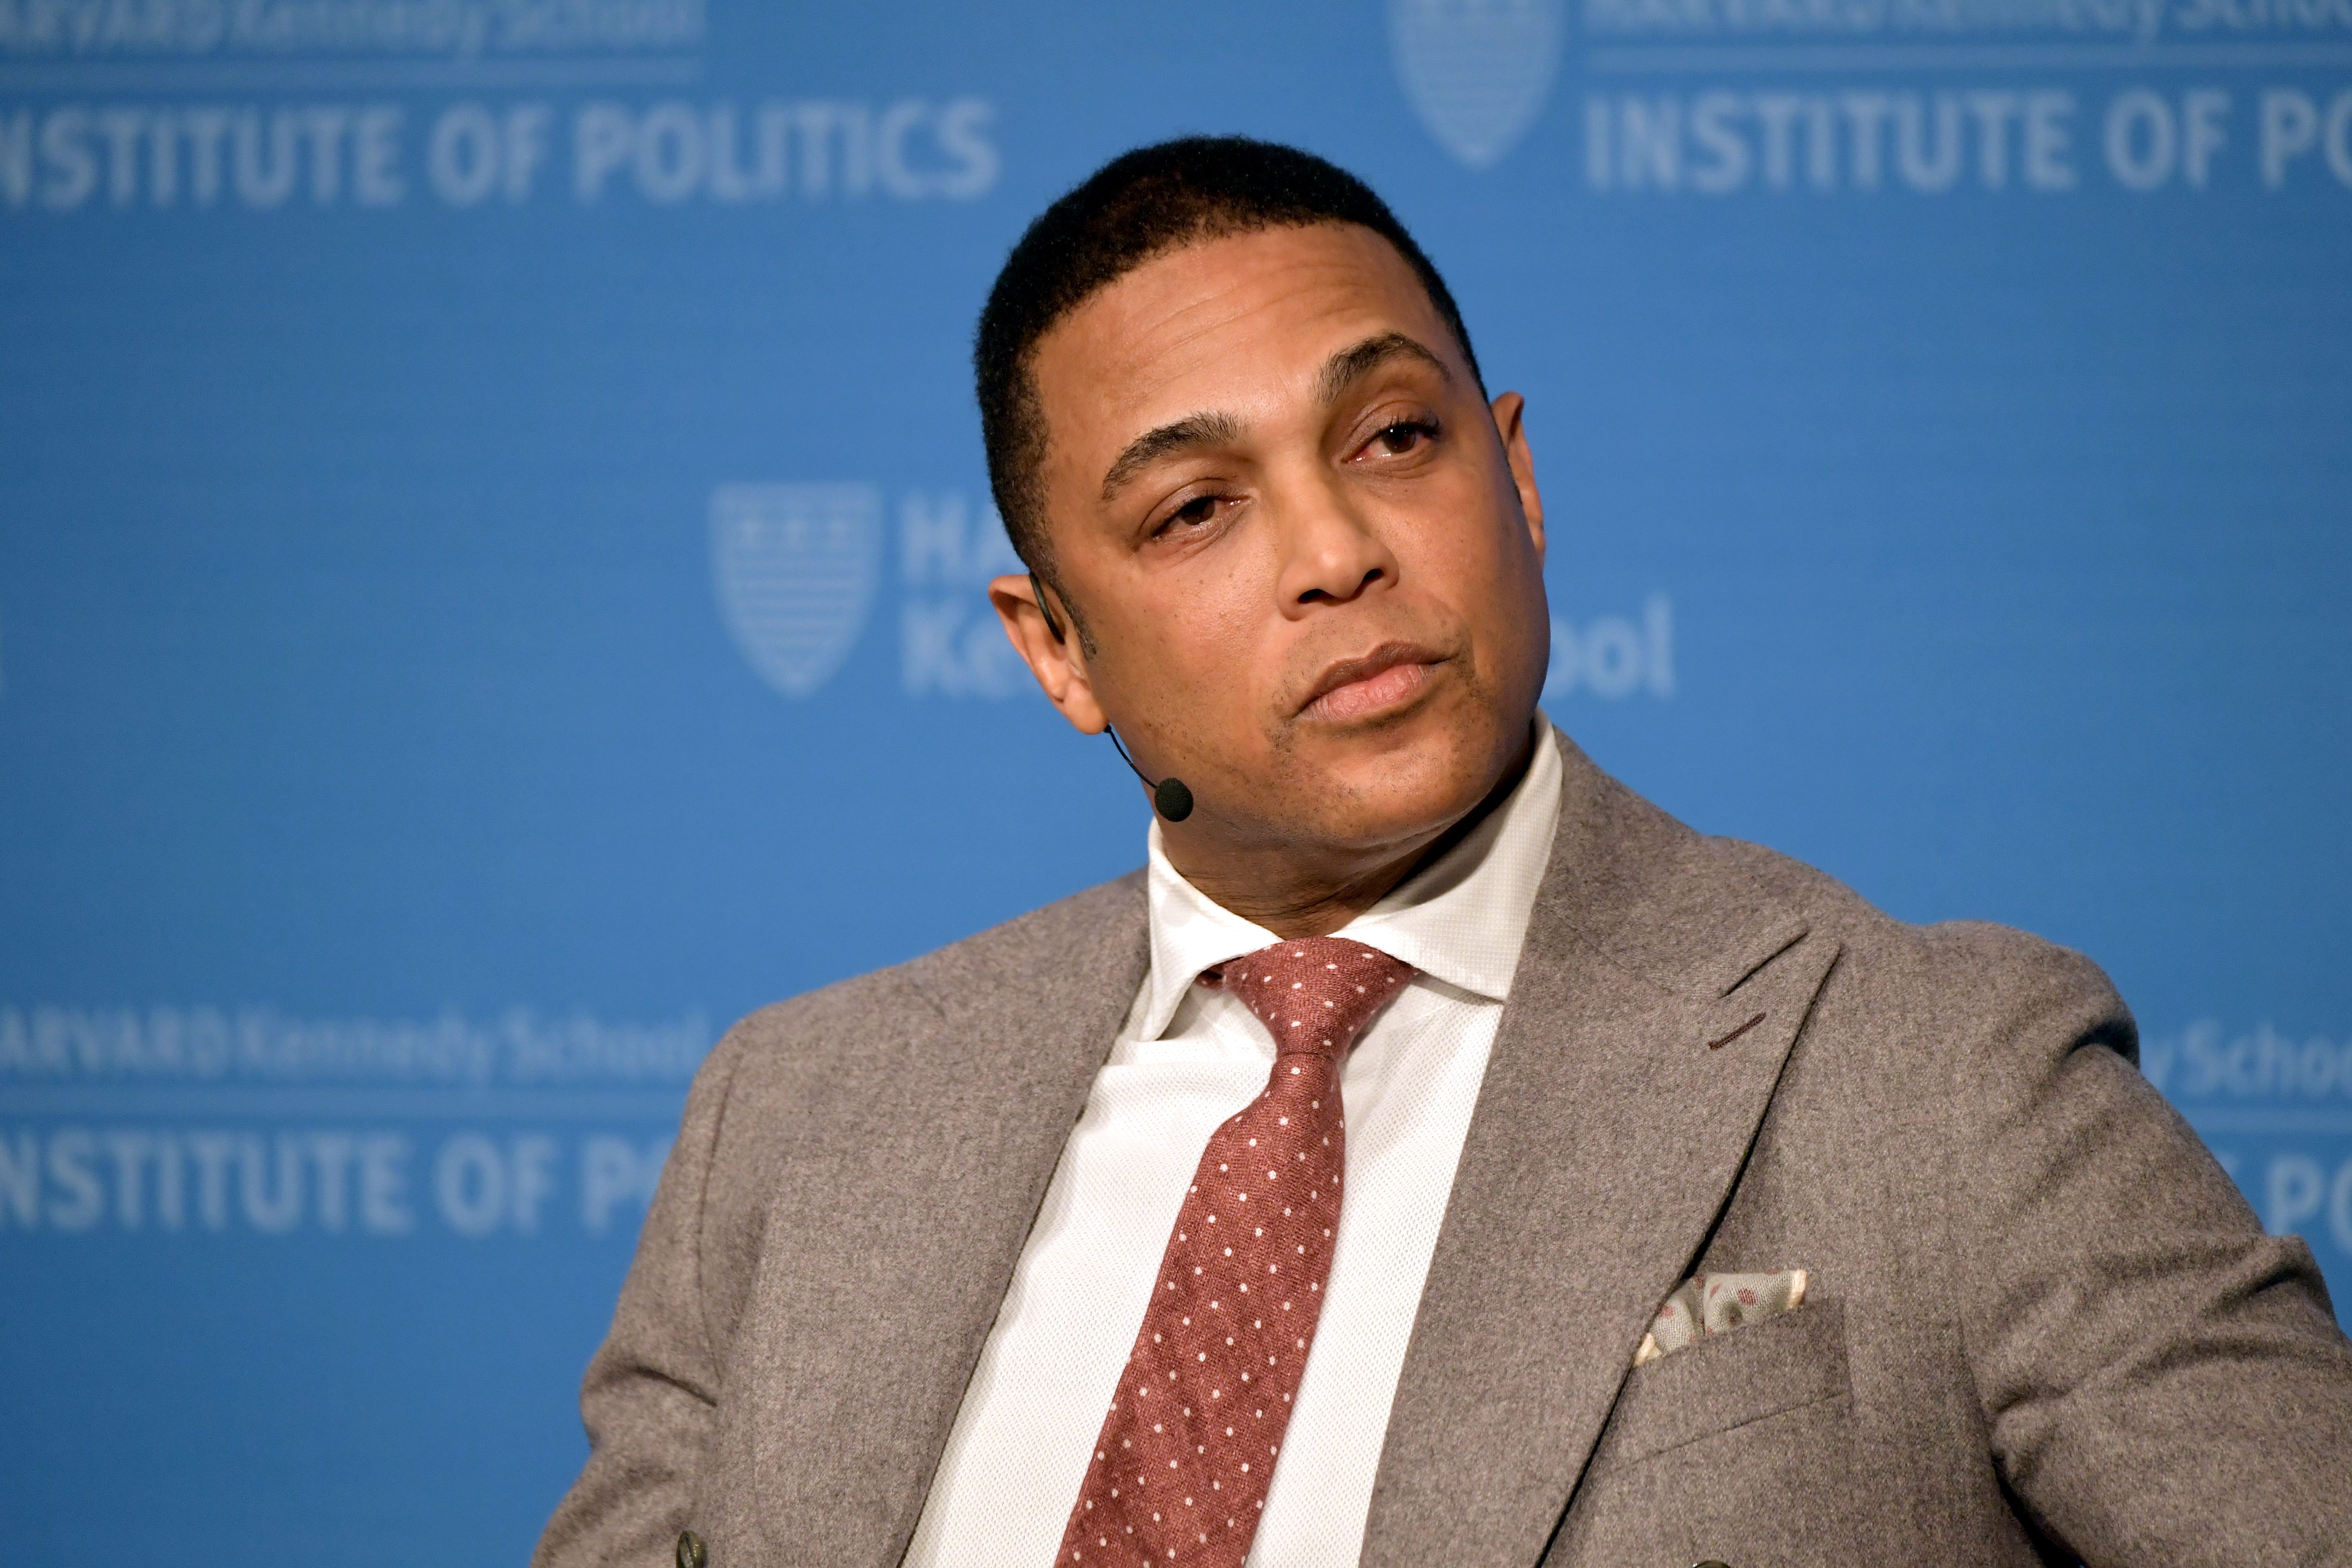 Don Lemon attends a speaking engagement at Harvard Kennedy School | Source: Getty Images